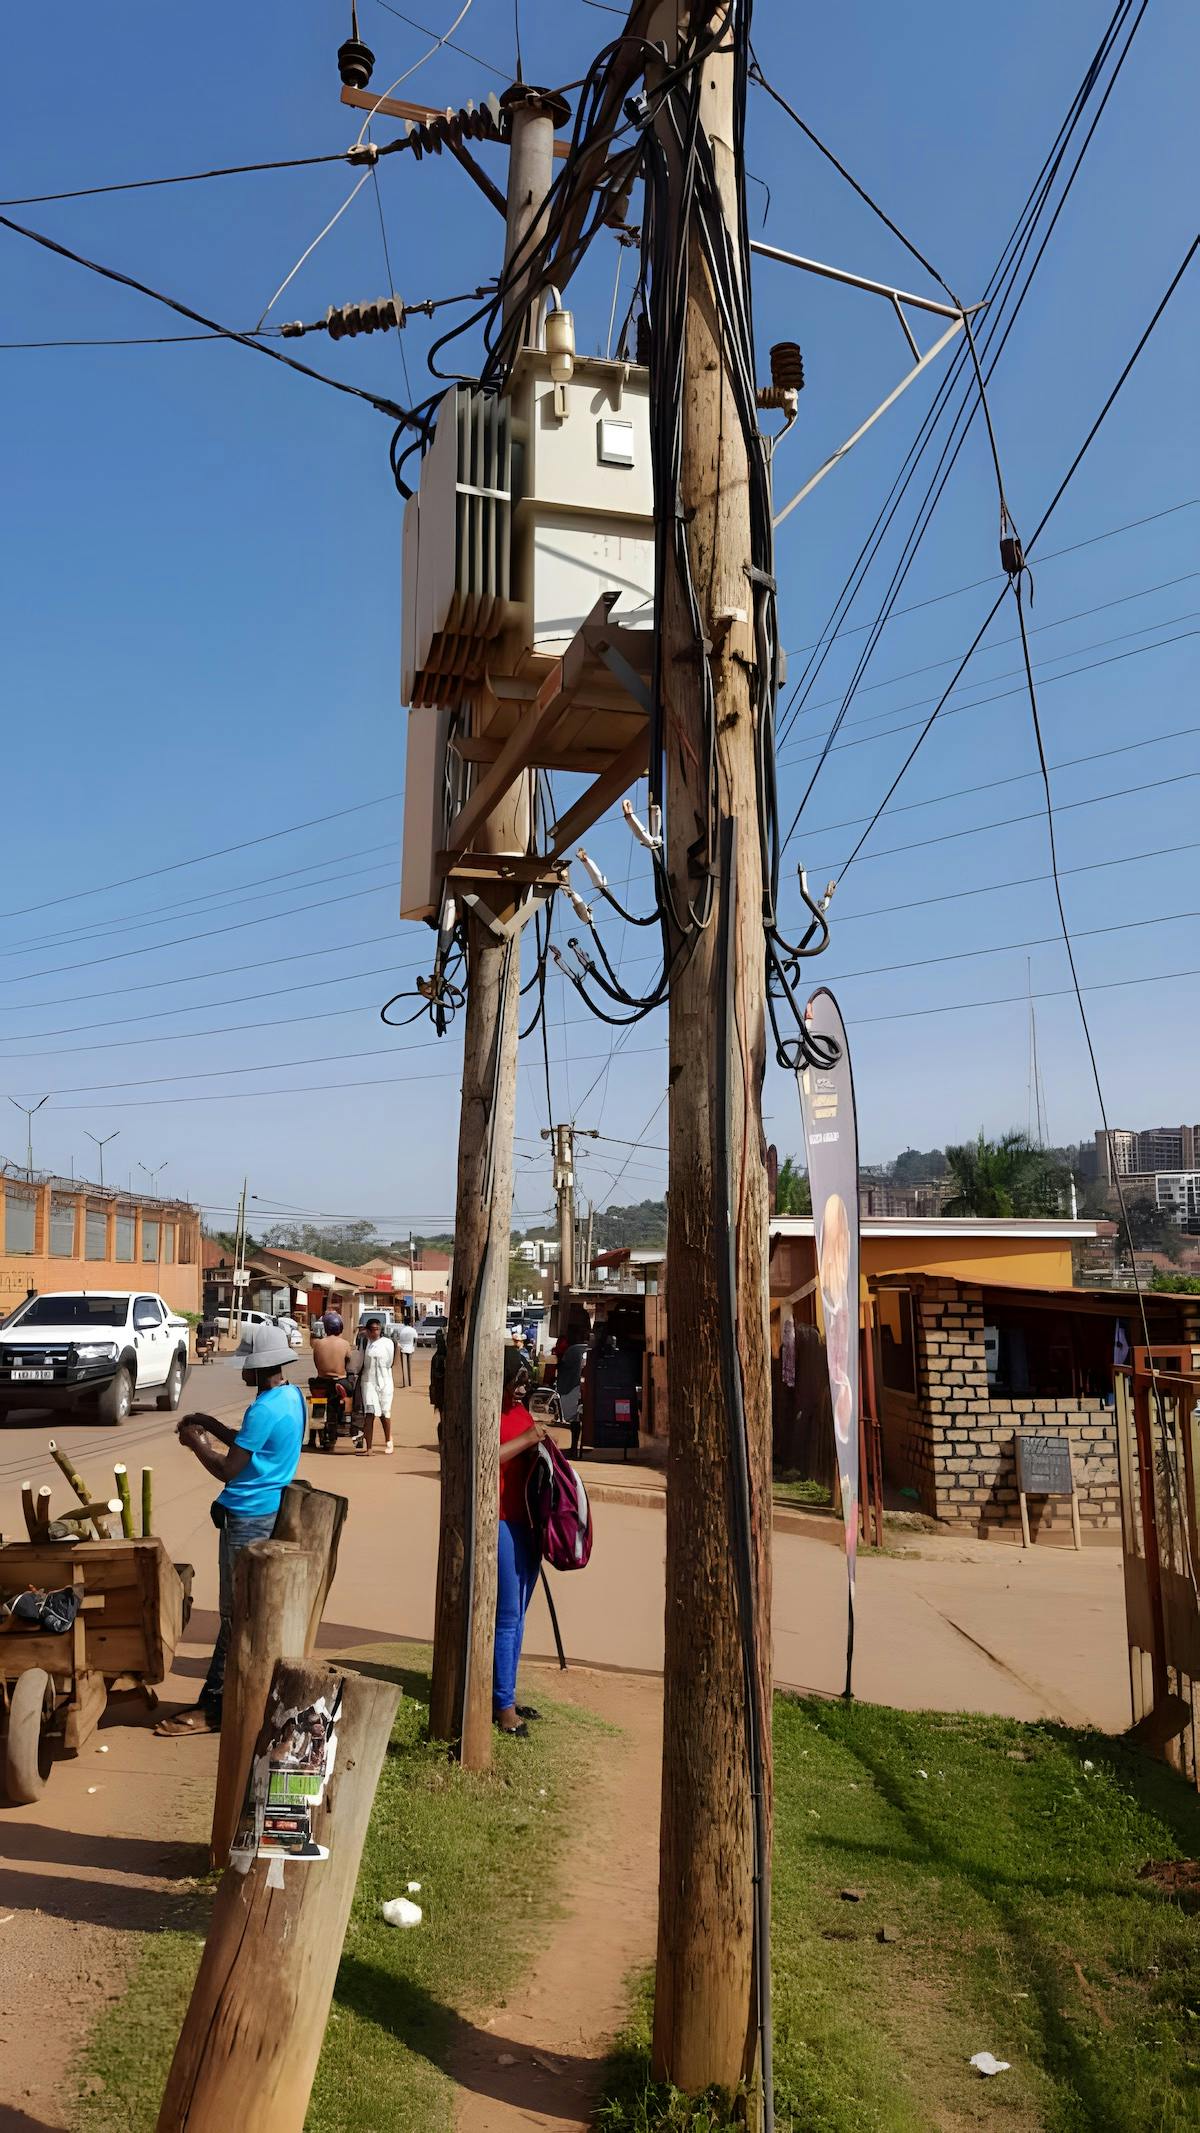 A transformer in one of the formal communities (credit: Paul Kyoma)